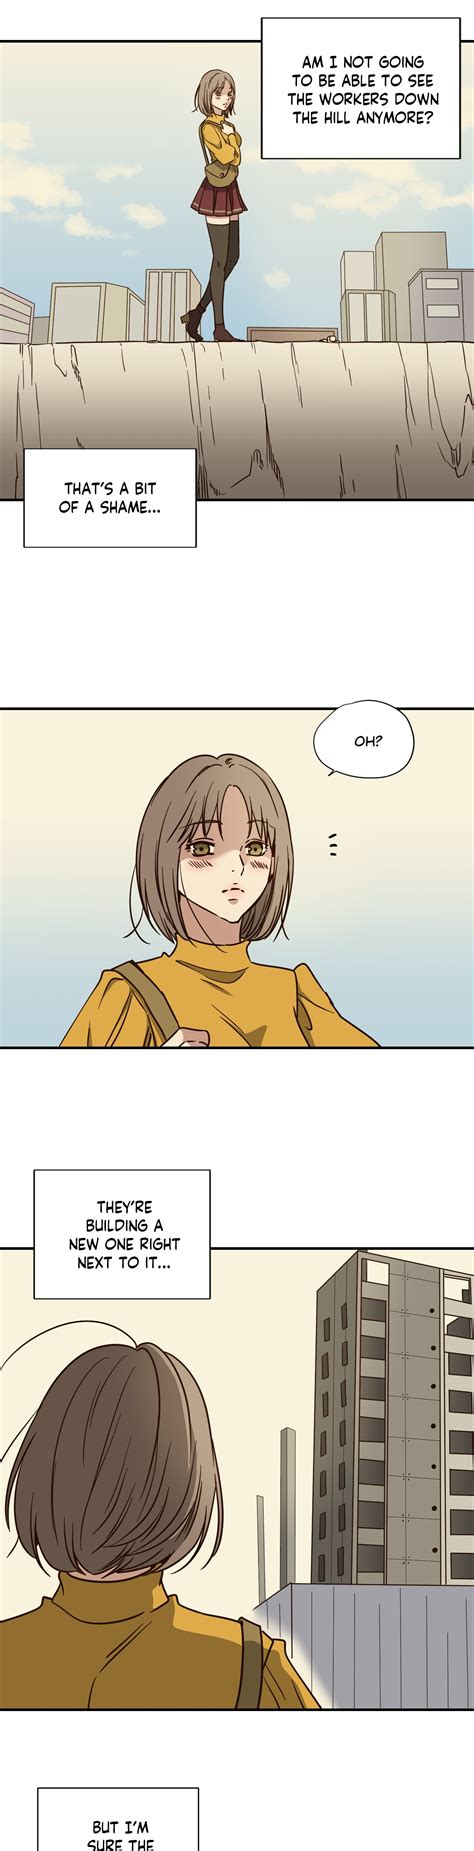 Temptress manhwa raw. Suggestions: You are reading Chapter 77. Click in Temptress - raw, click on the image to go to the next chapter or previous chapter "single page mode". you can also use the arrow keys to go to the next or previous chapter. manhwa-raw.com is … 